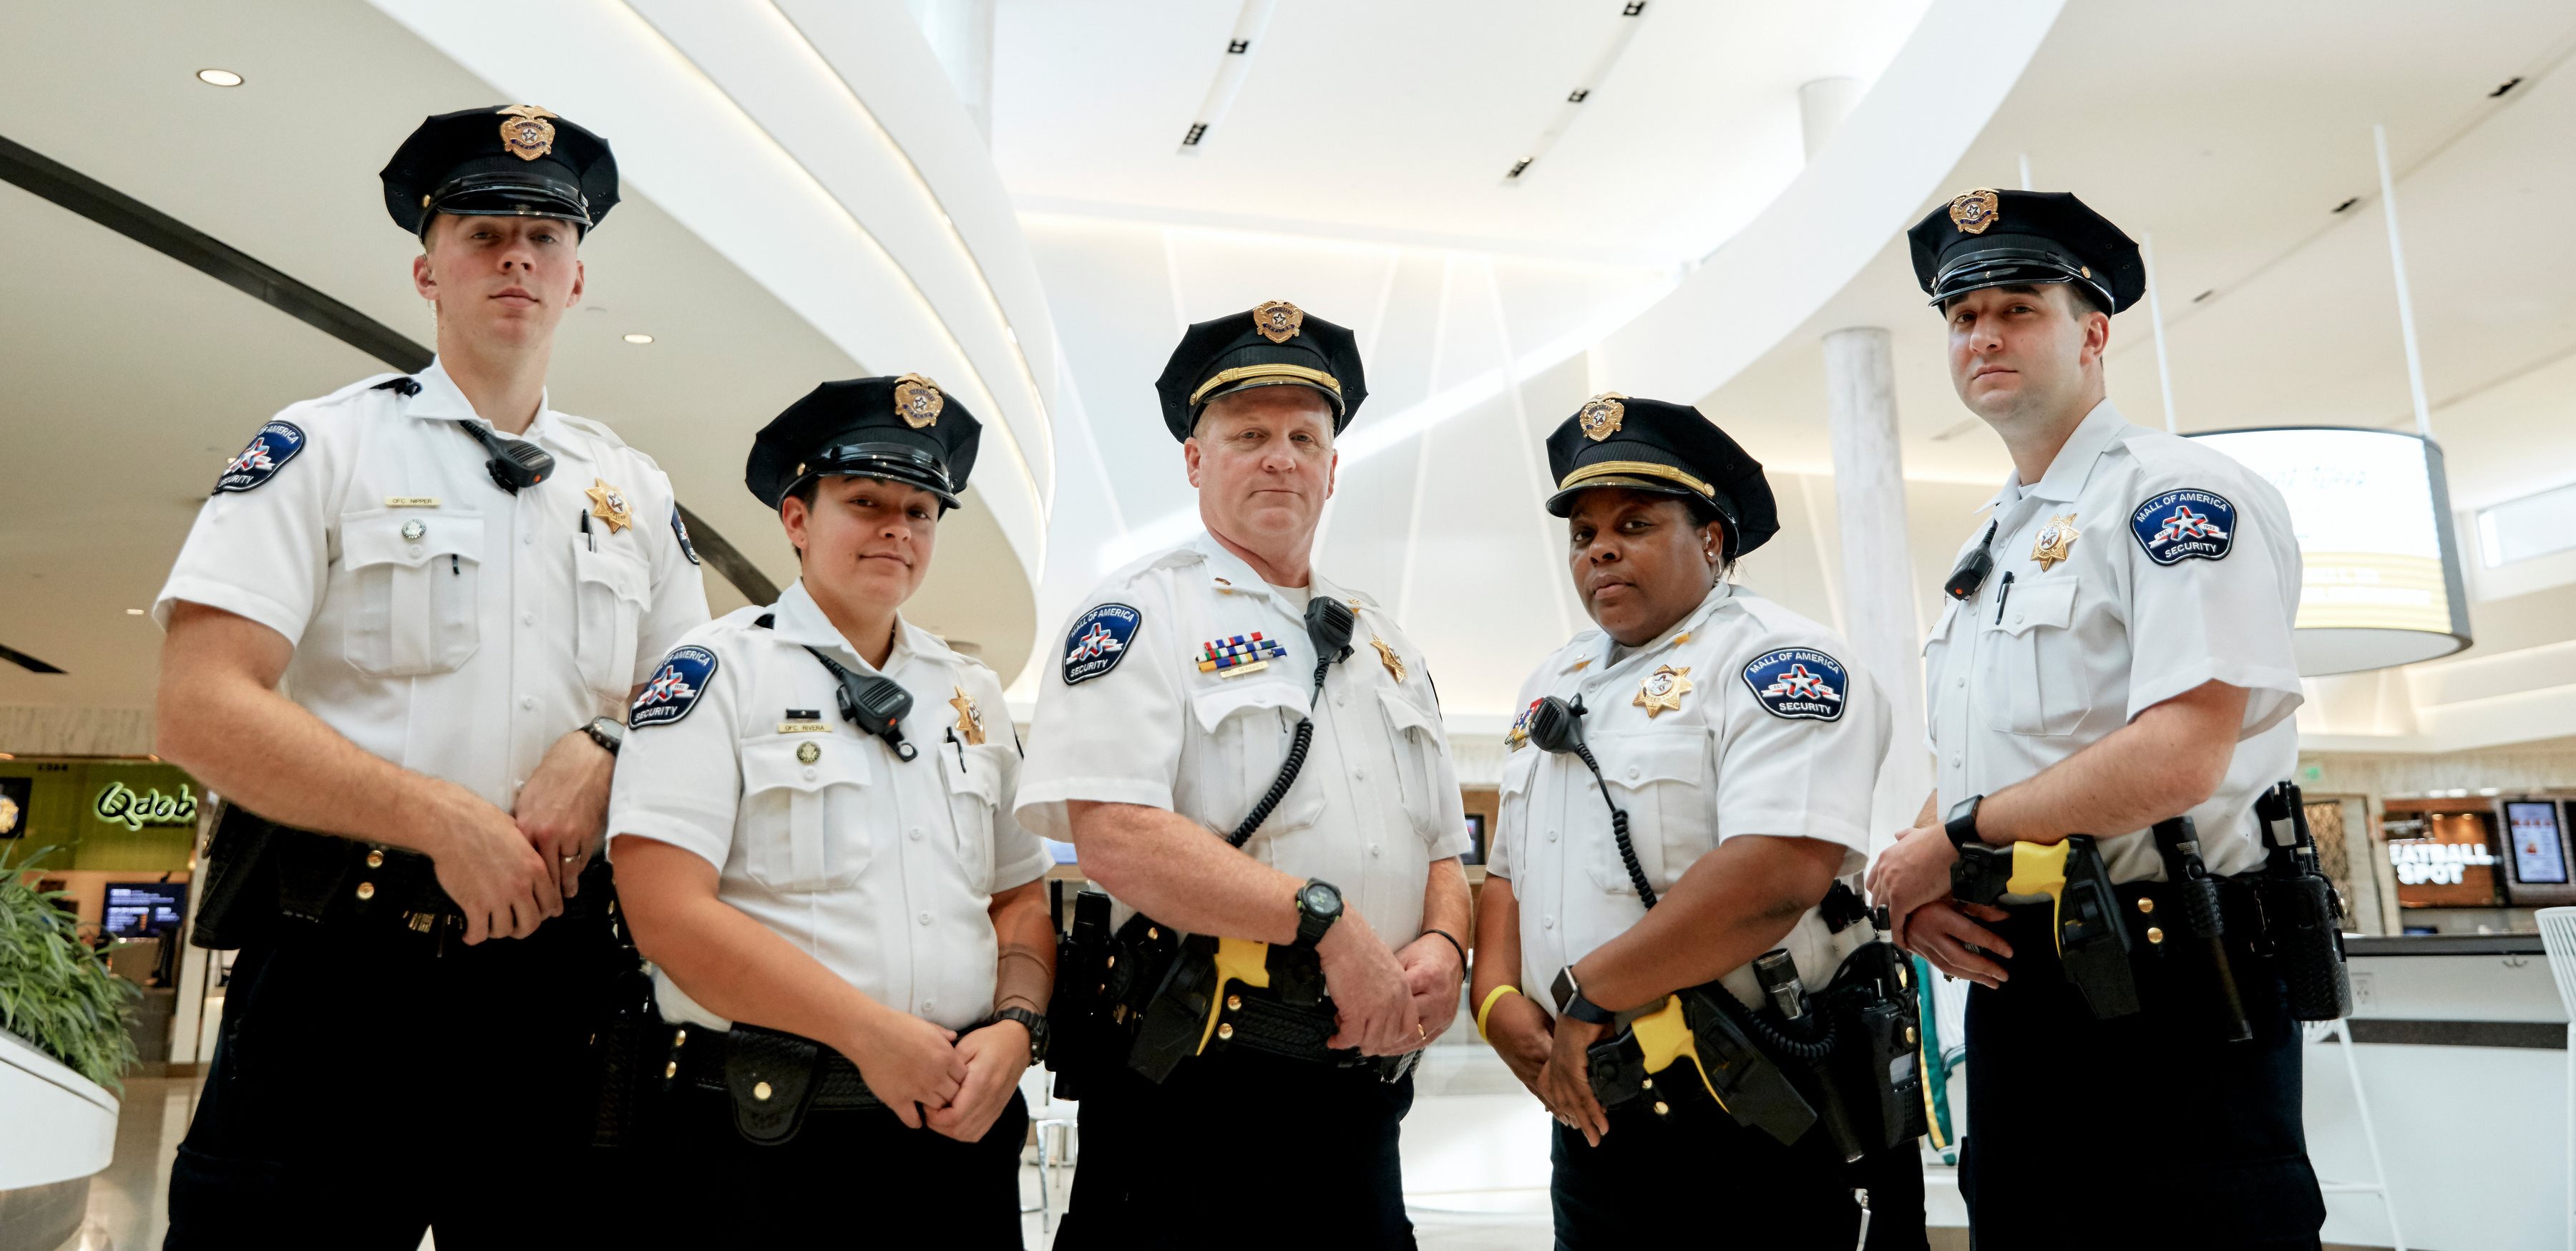 Armed security guard jobs in connecticut